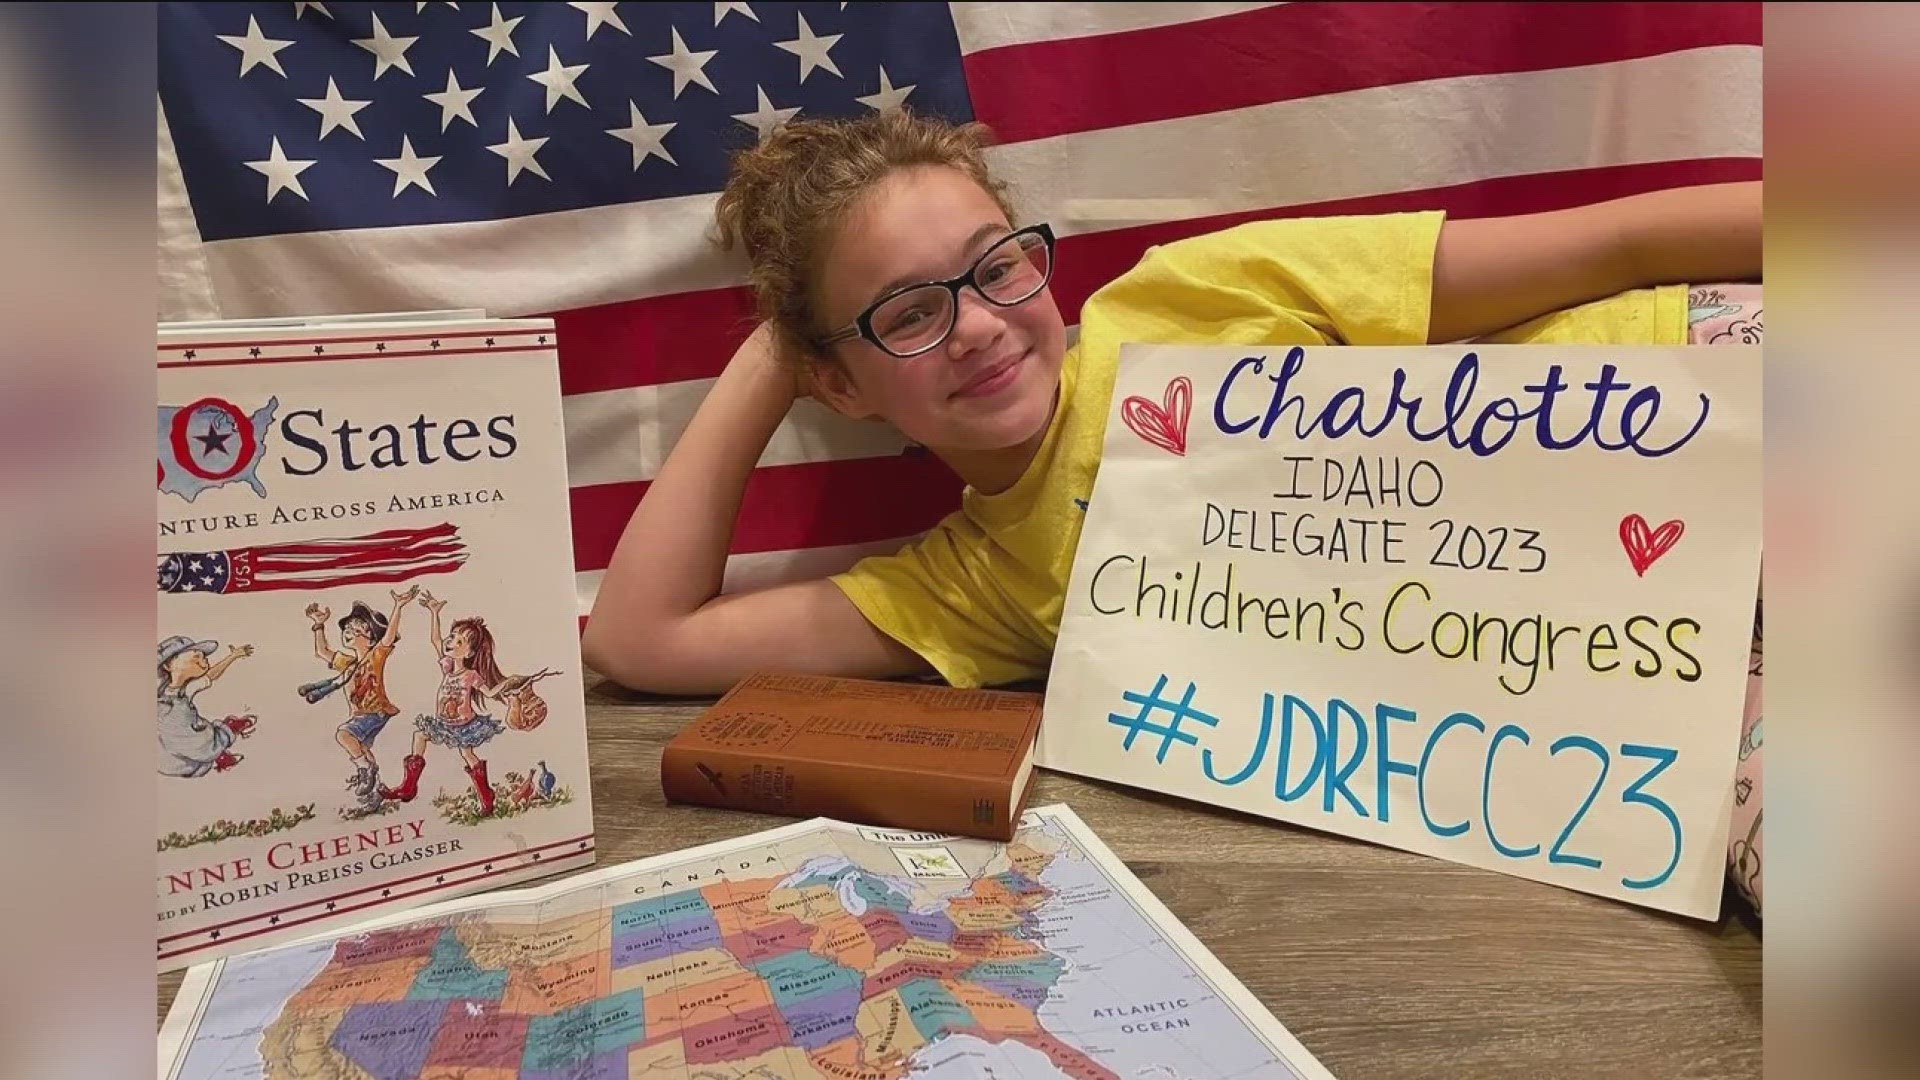 Charlotte Swenson will be representing the state of Idaho at the JDRF Children's Congress in Washington D.C.